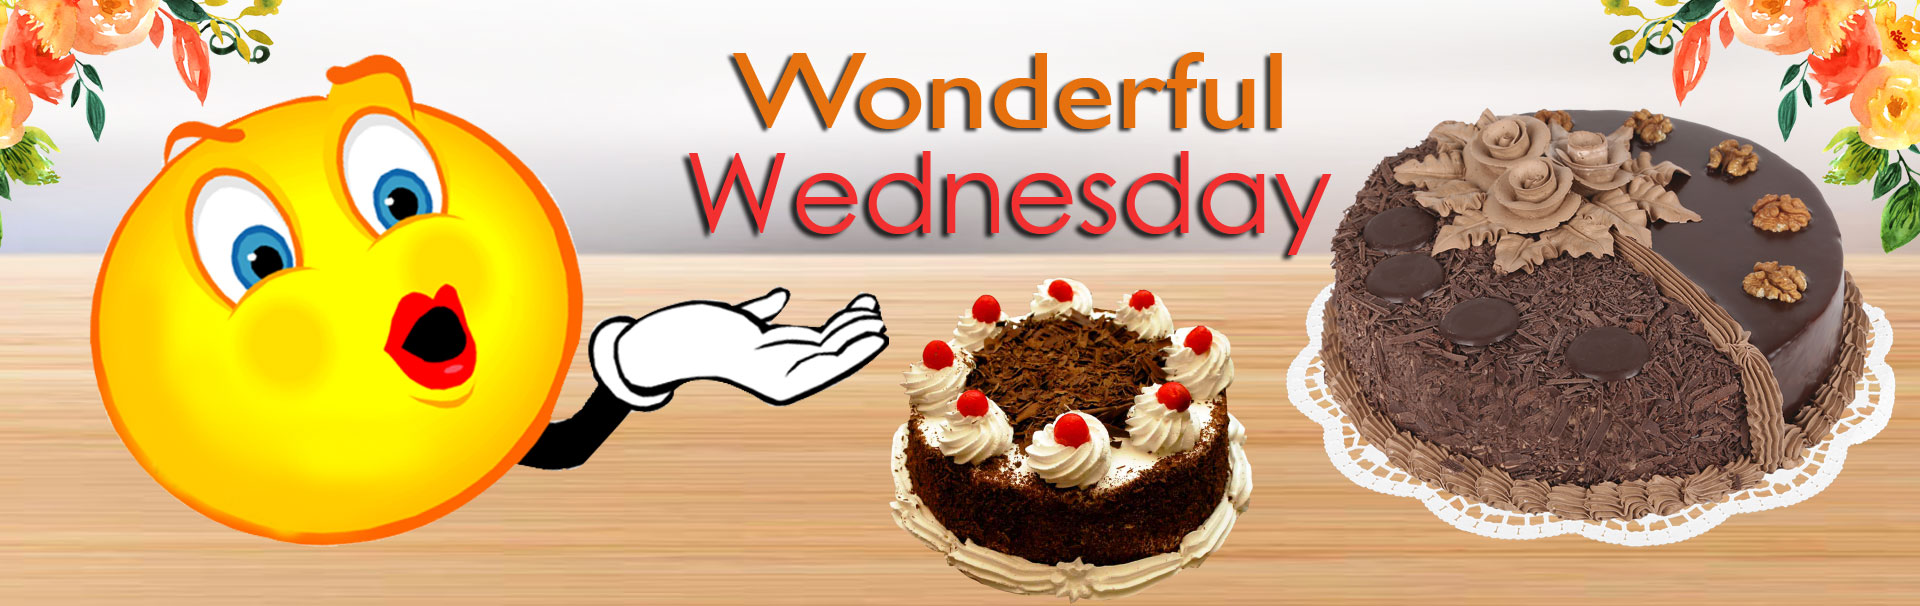 Welcome to Wednesday in cakes on hand